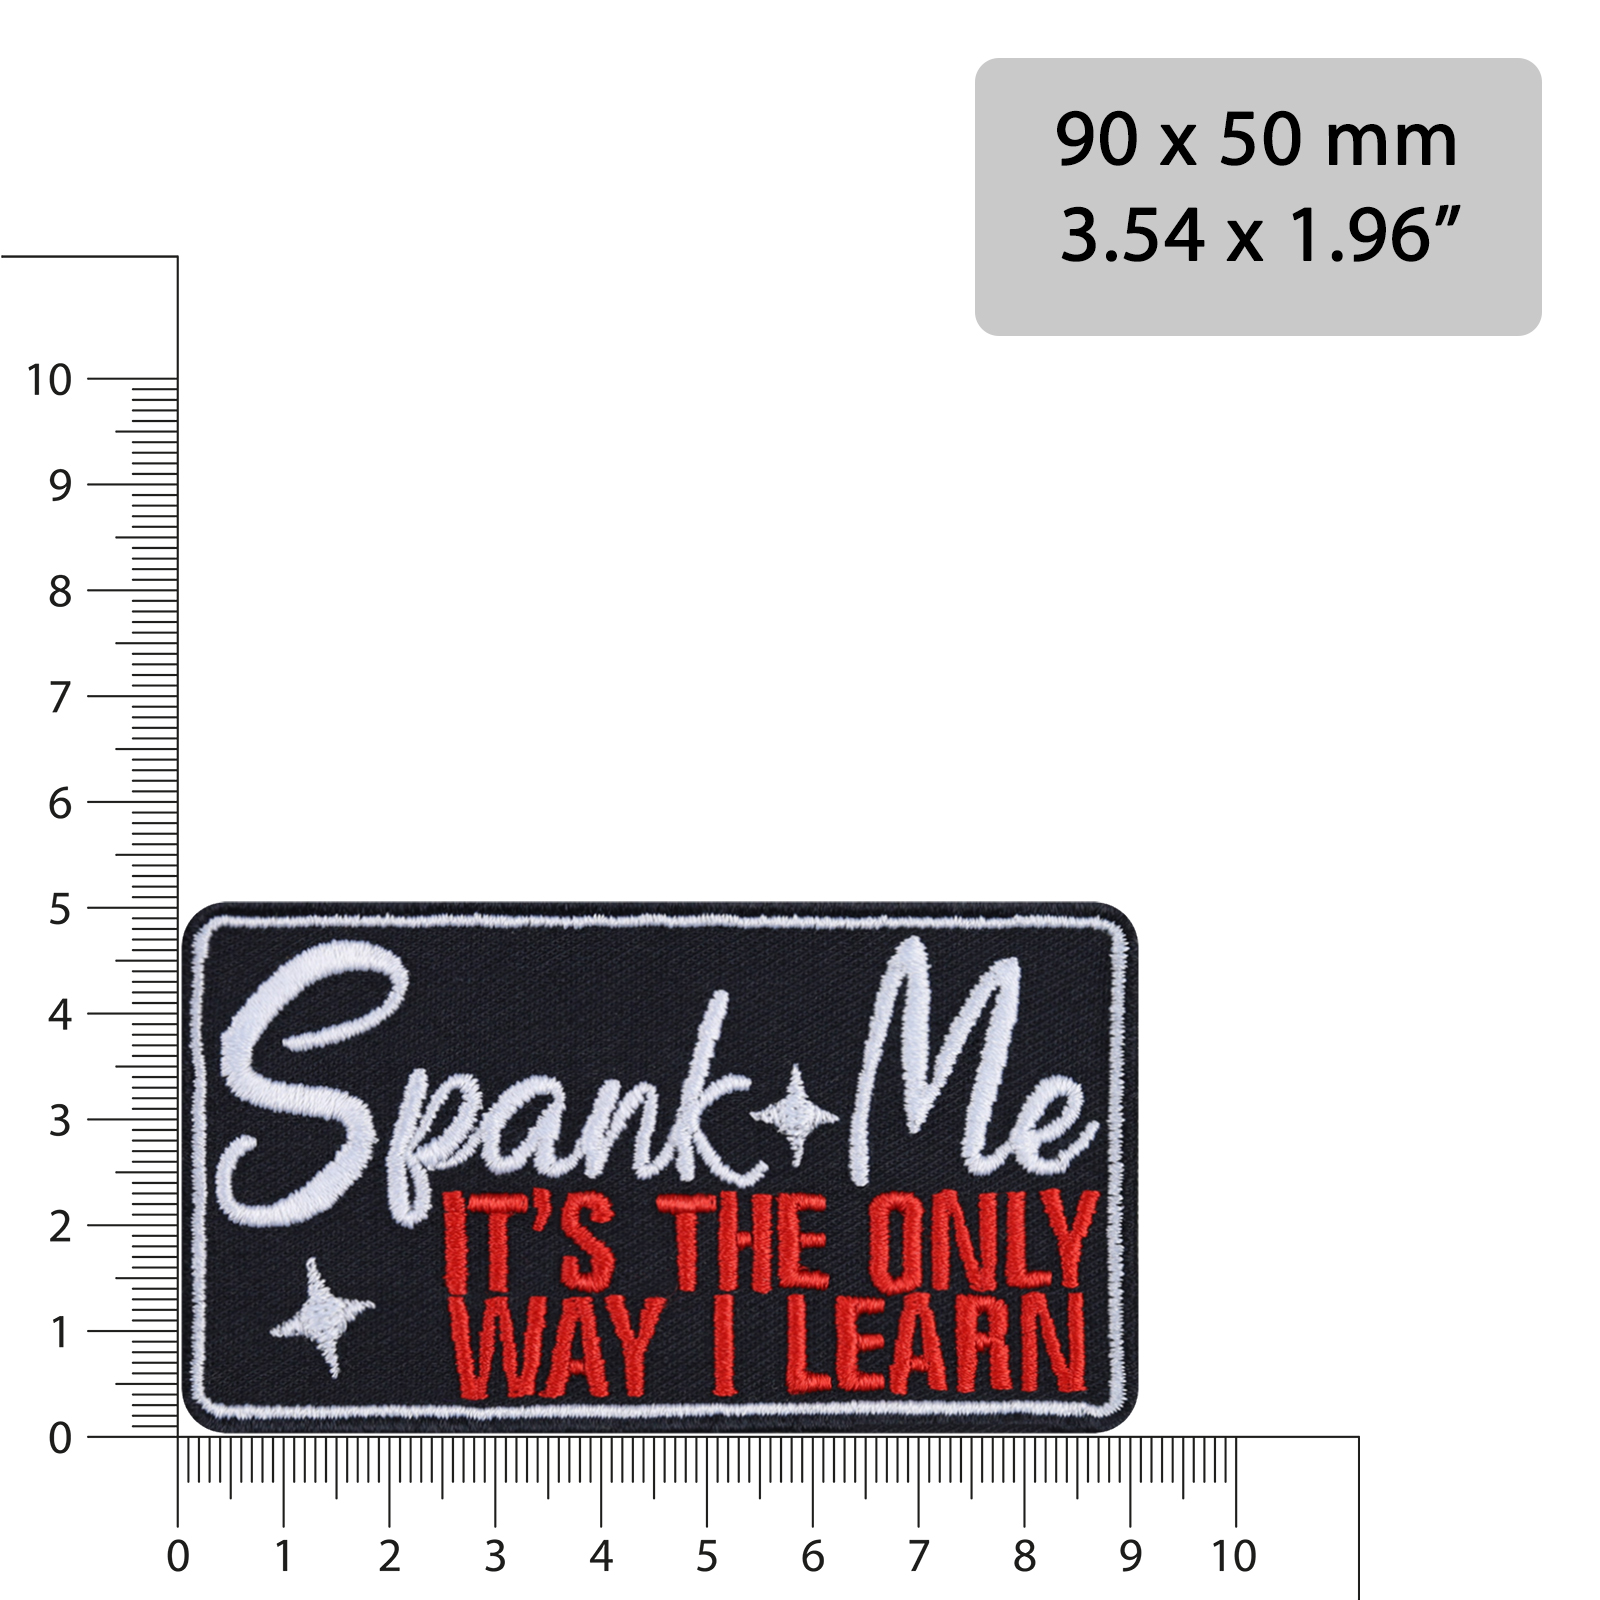 Spank me - It's the only way i learn - Patch